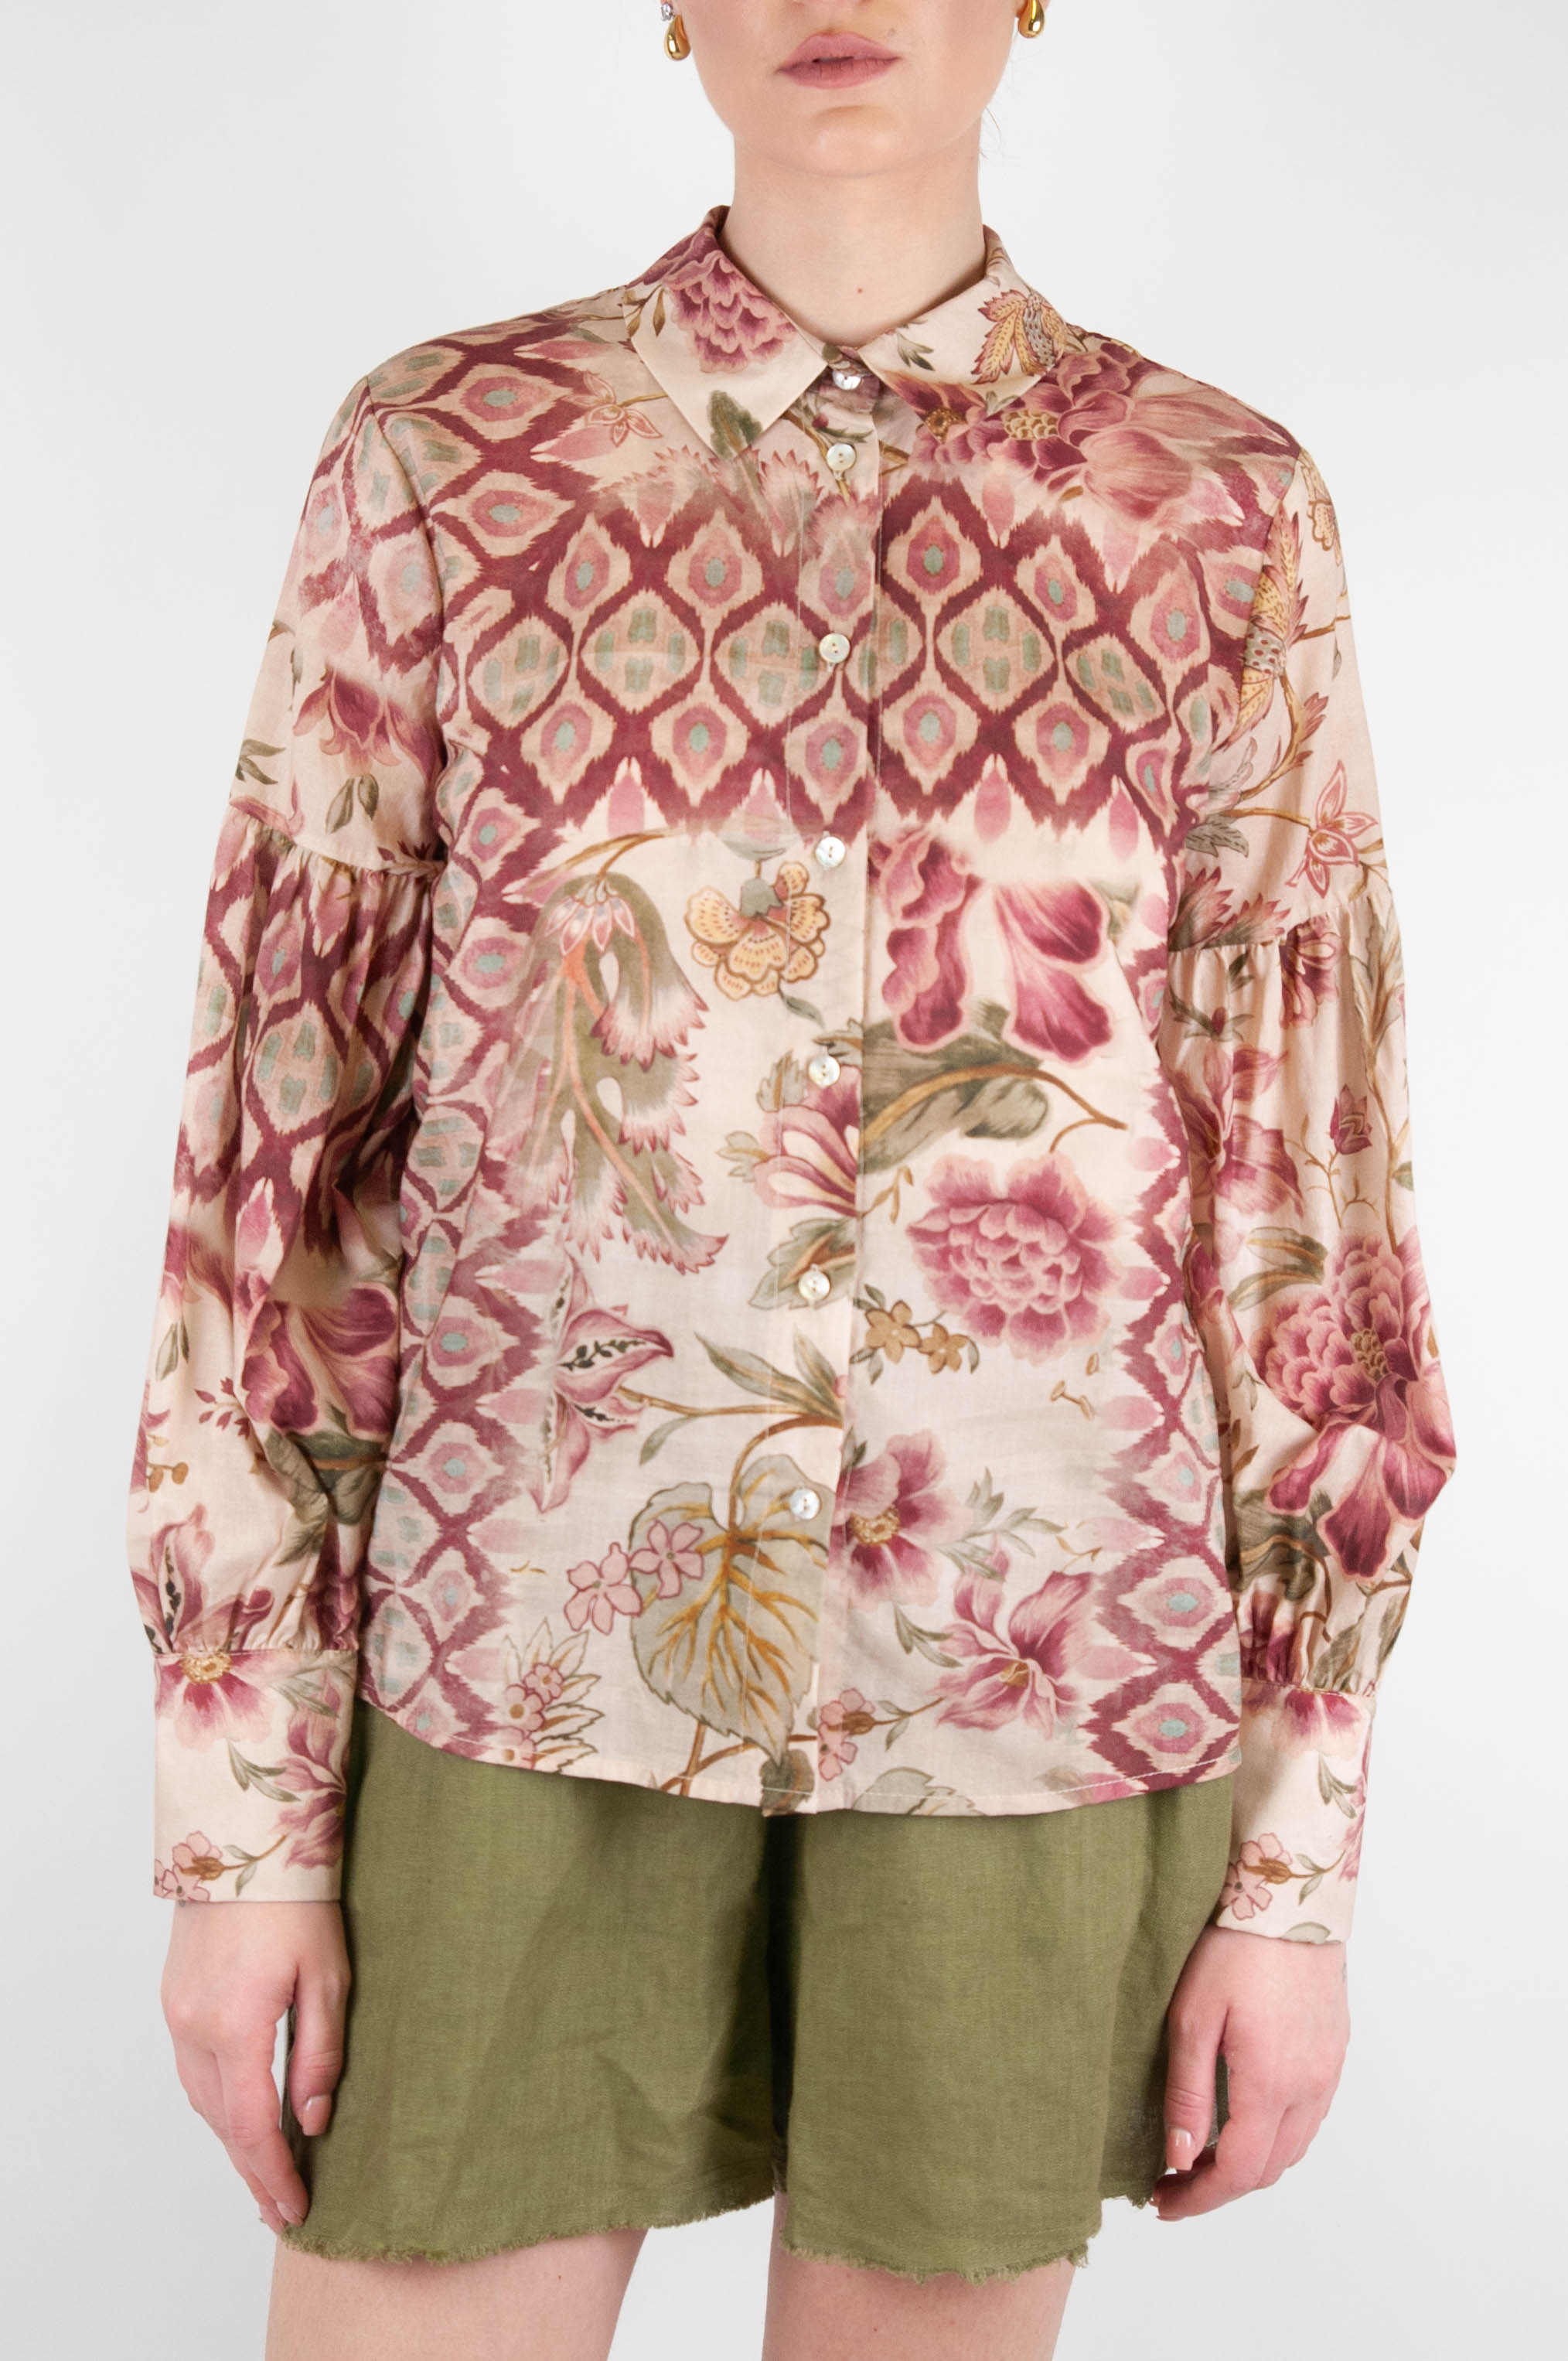 Tension in - Abstract floral patterned shirt in cotton muslin